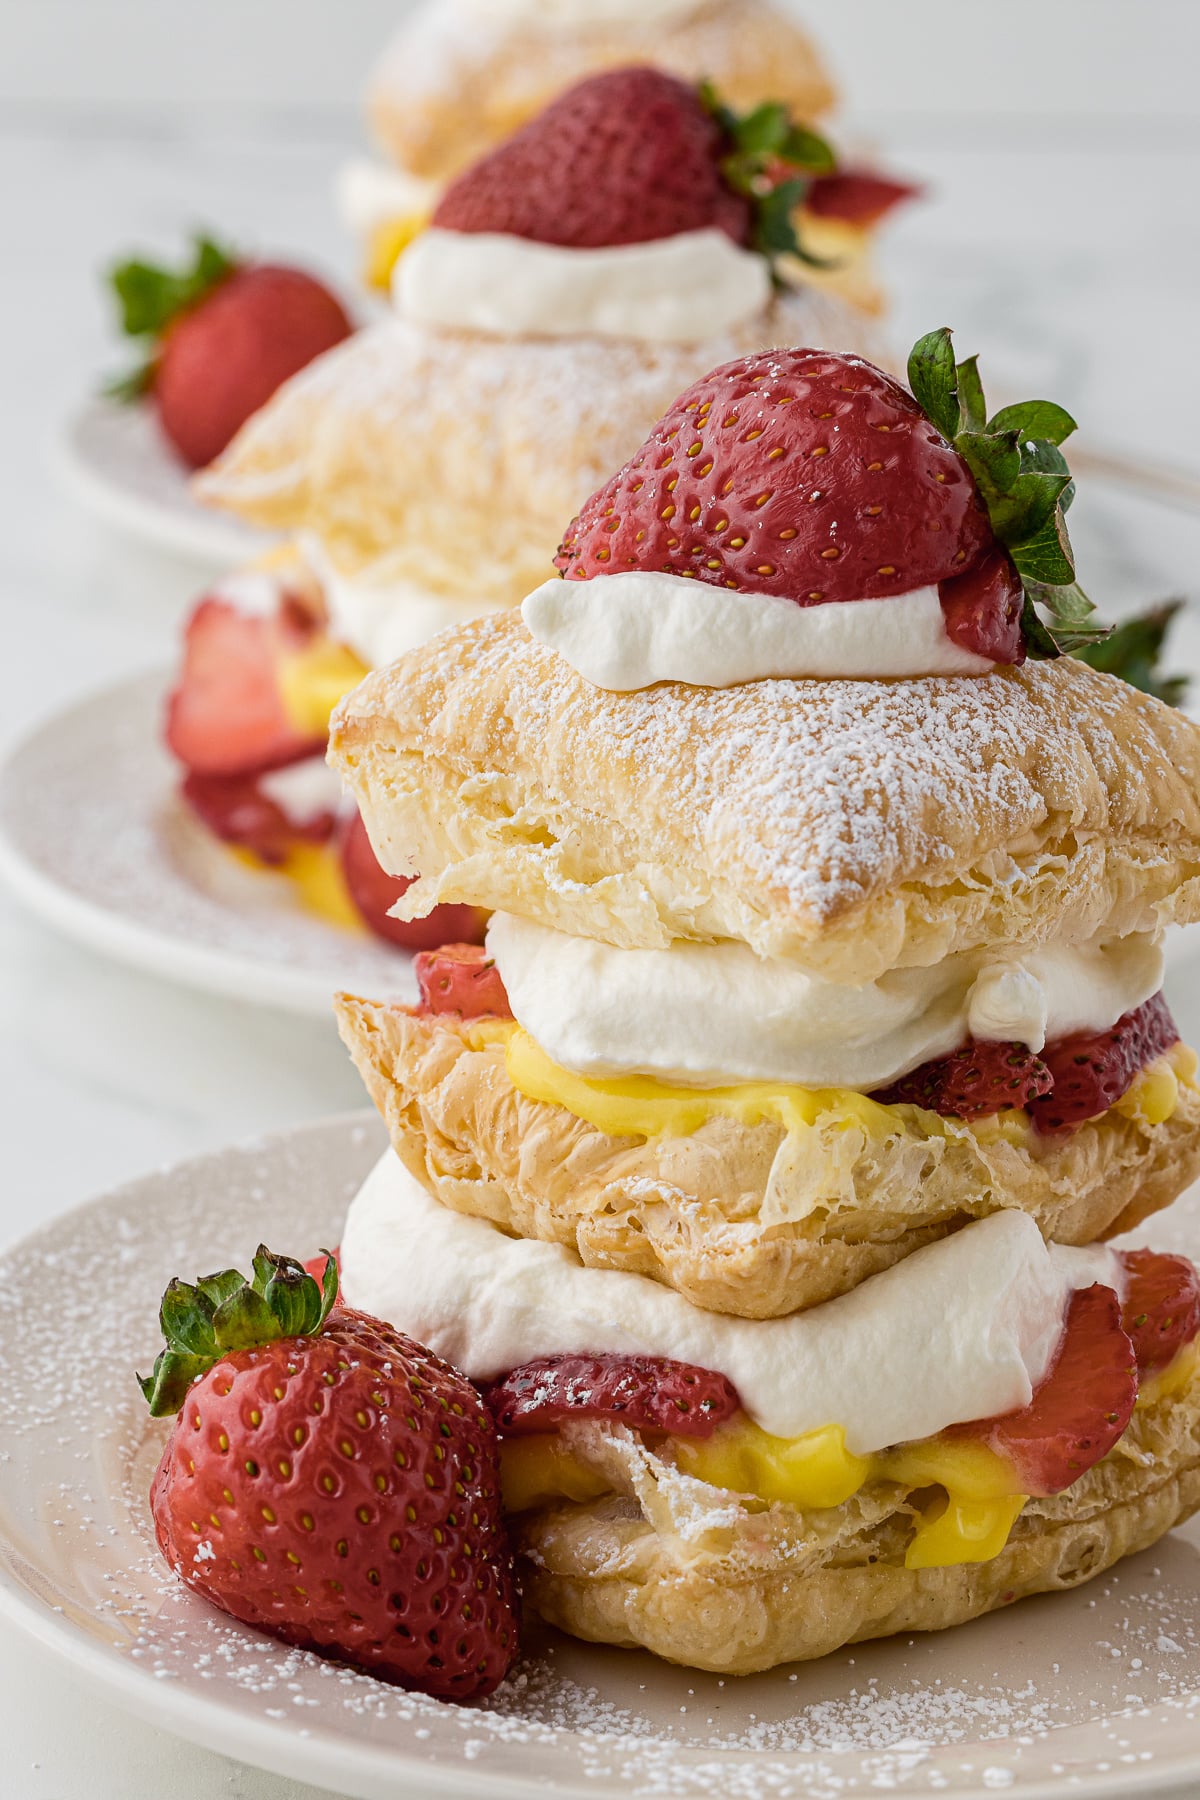 Strawberry Napoleon desserts on white plates with fresh strawberries and dusted with powdered sugar